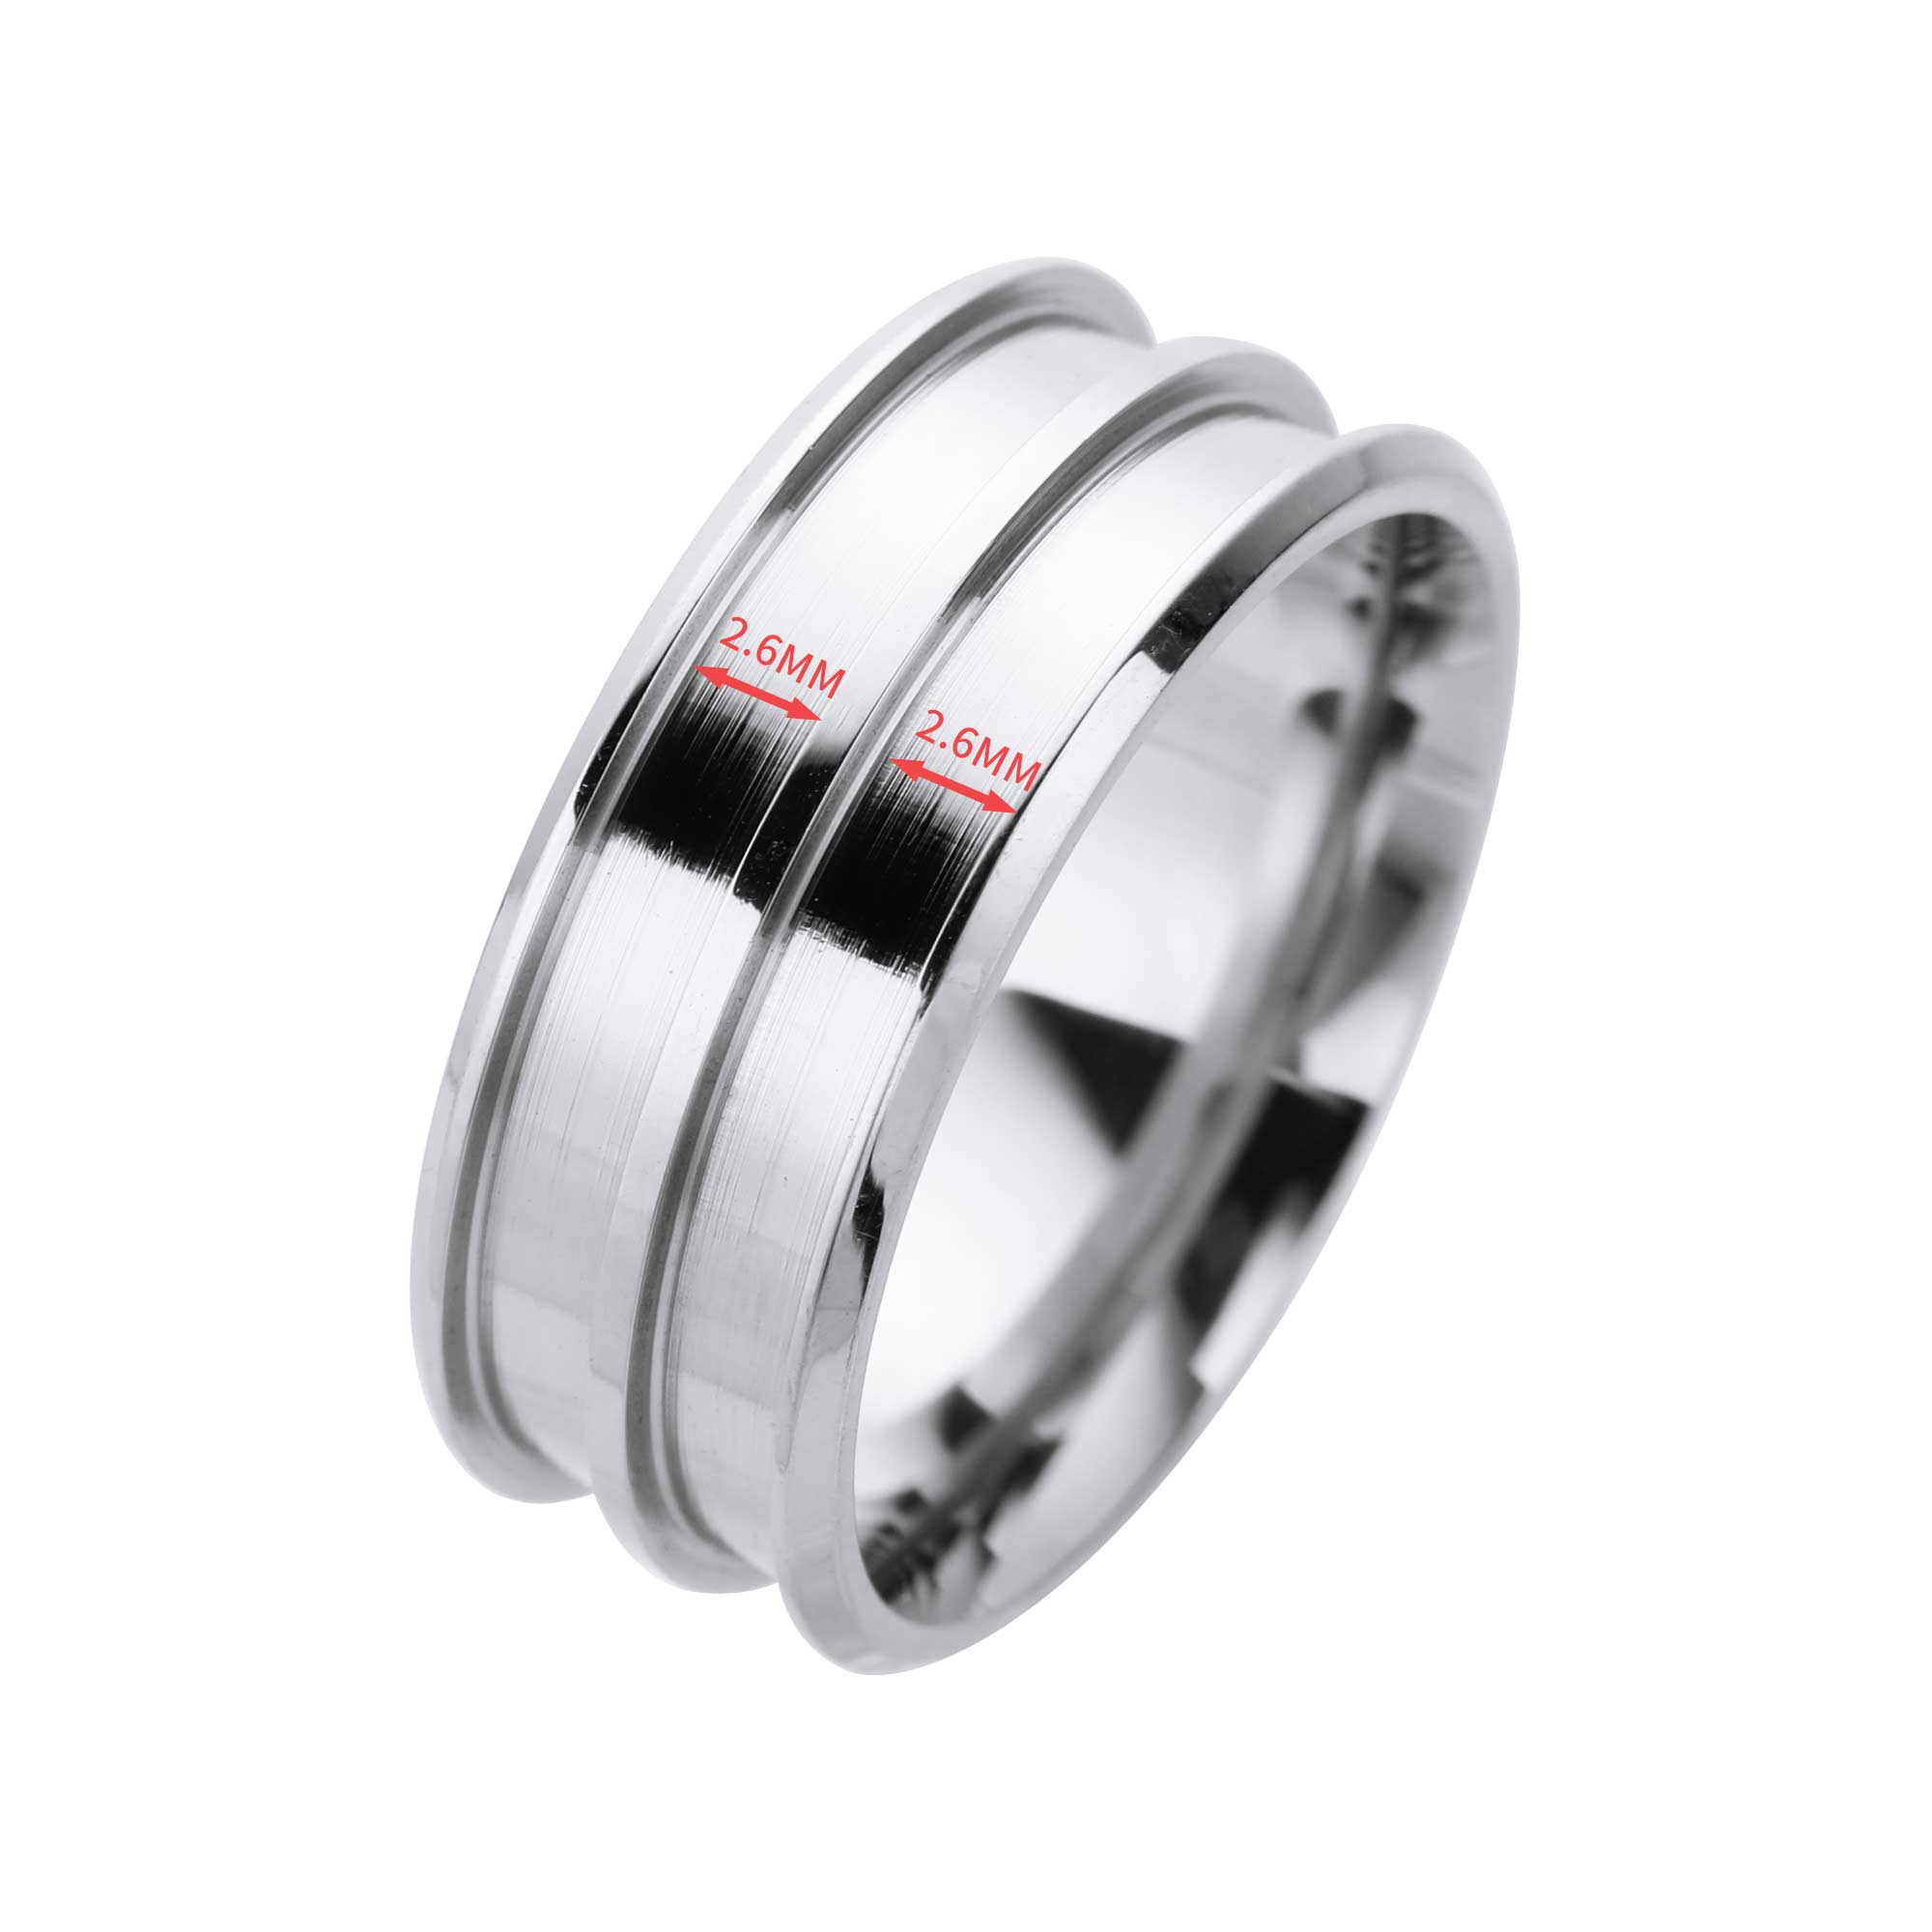 2.6+2.6MM Keepsake Mens' Resin Ashes Channel Ring Settings,Double Channel Bezel Stainless Steel Ring Settings,Cremation Ring,Memorial Ring 1294520 - Click Image to Close